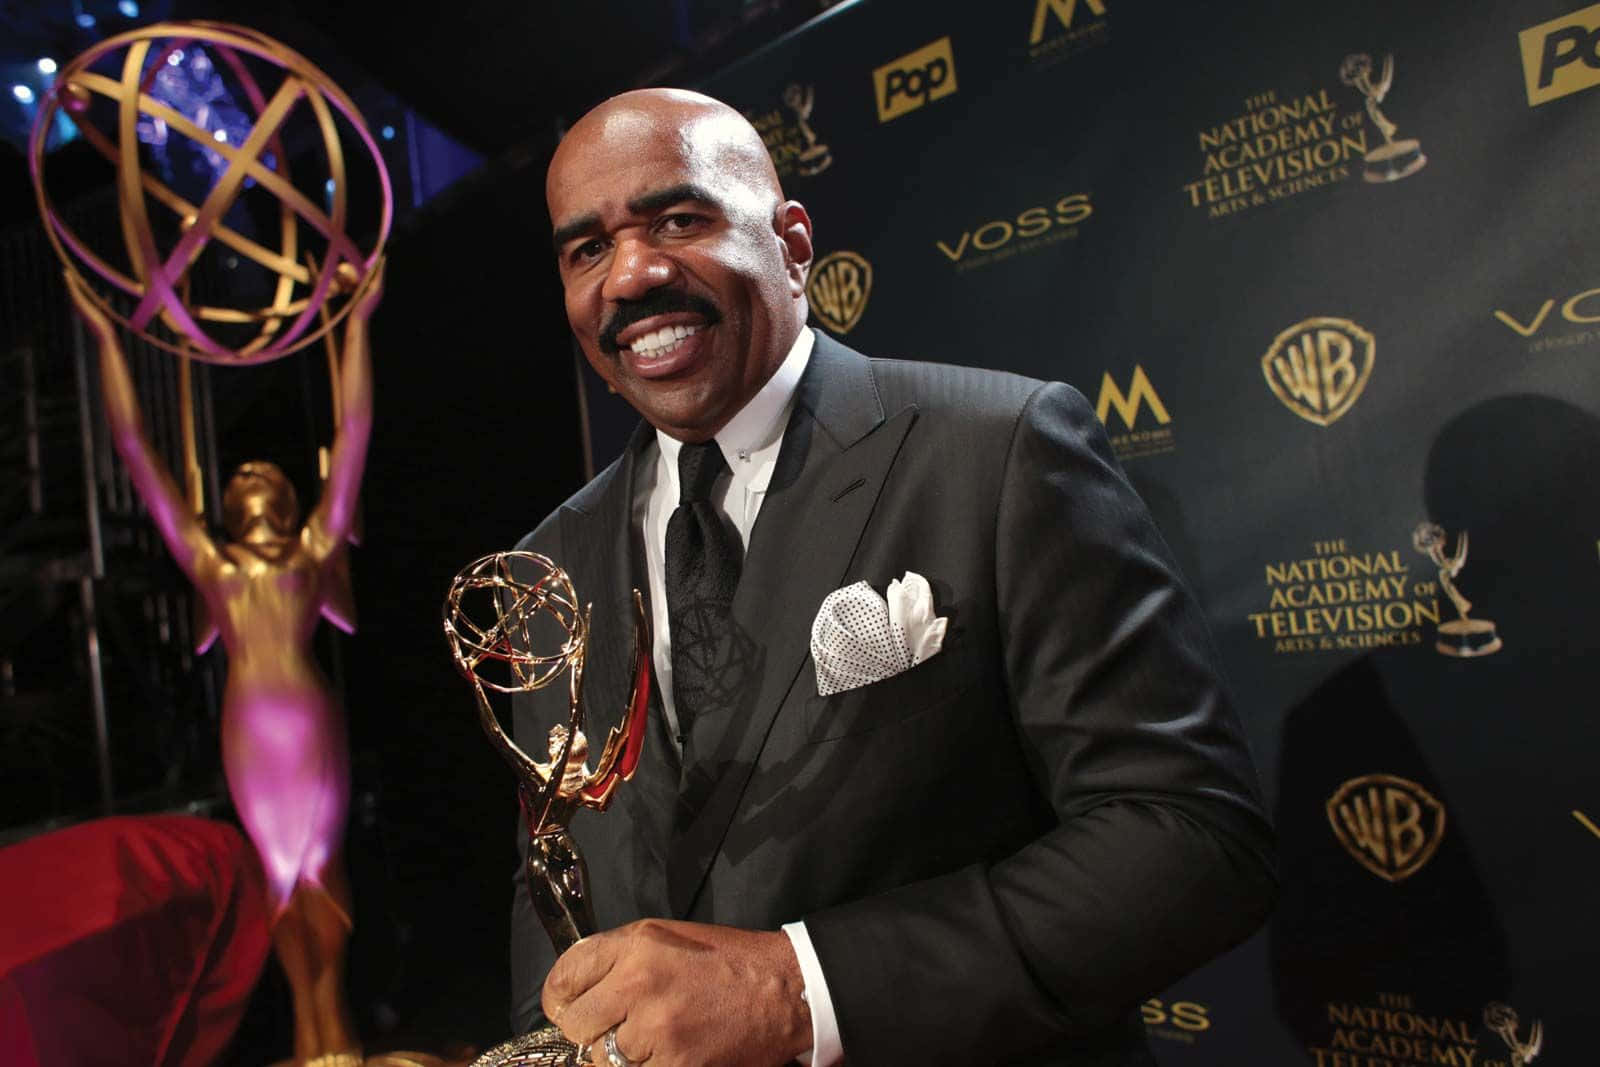 Renowned Tv Personality, Steve Harvey, Proudly Holding His Achievement Award